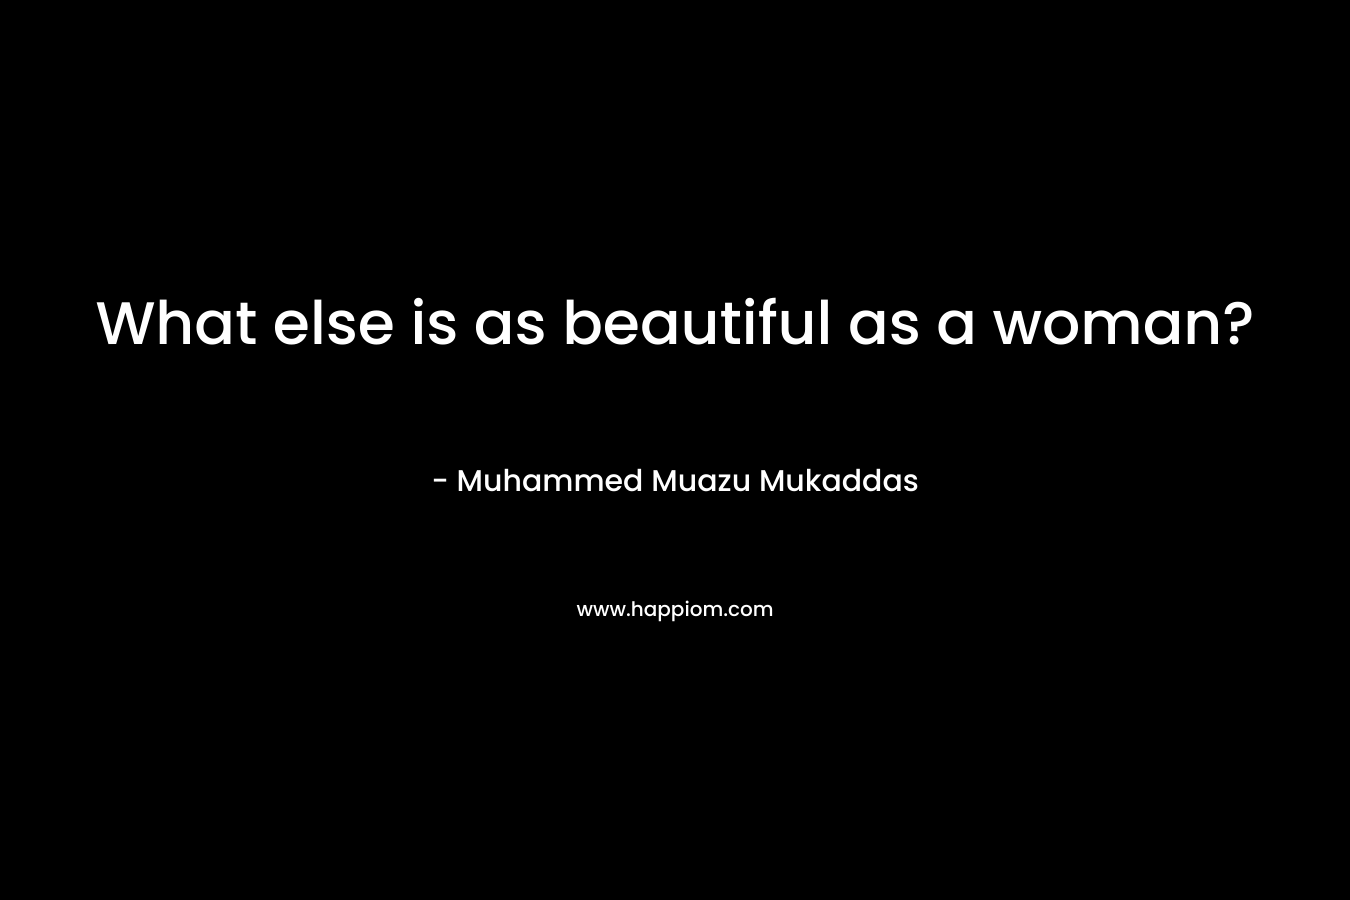 What else is as beautiful as a woman?